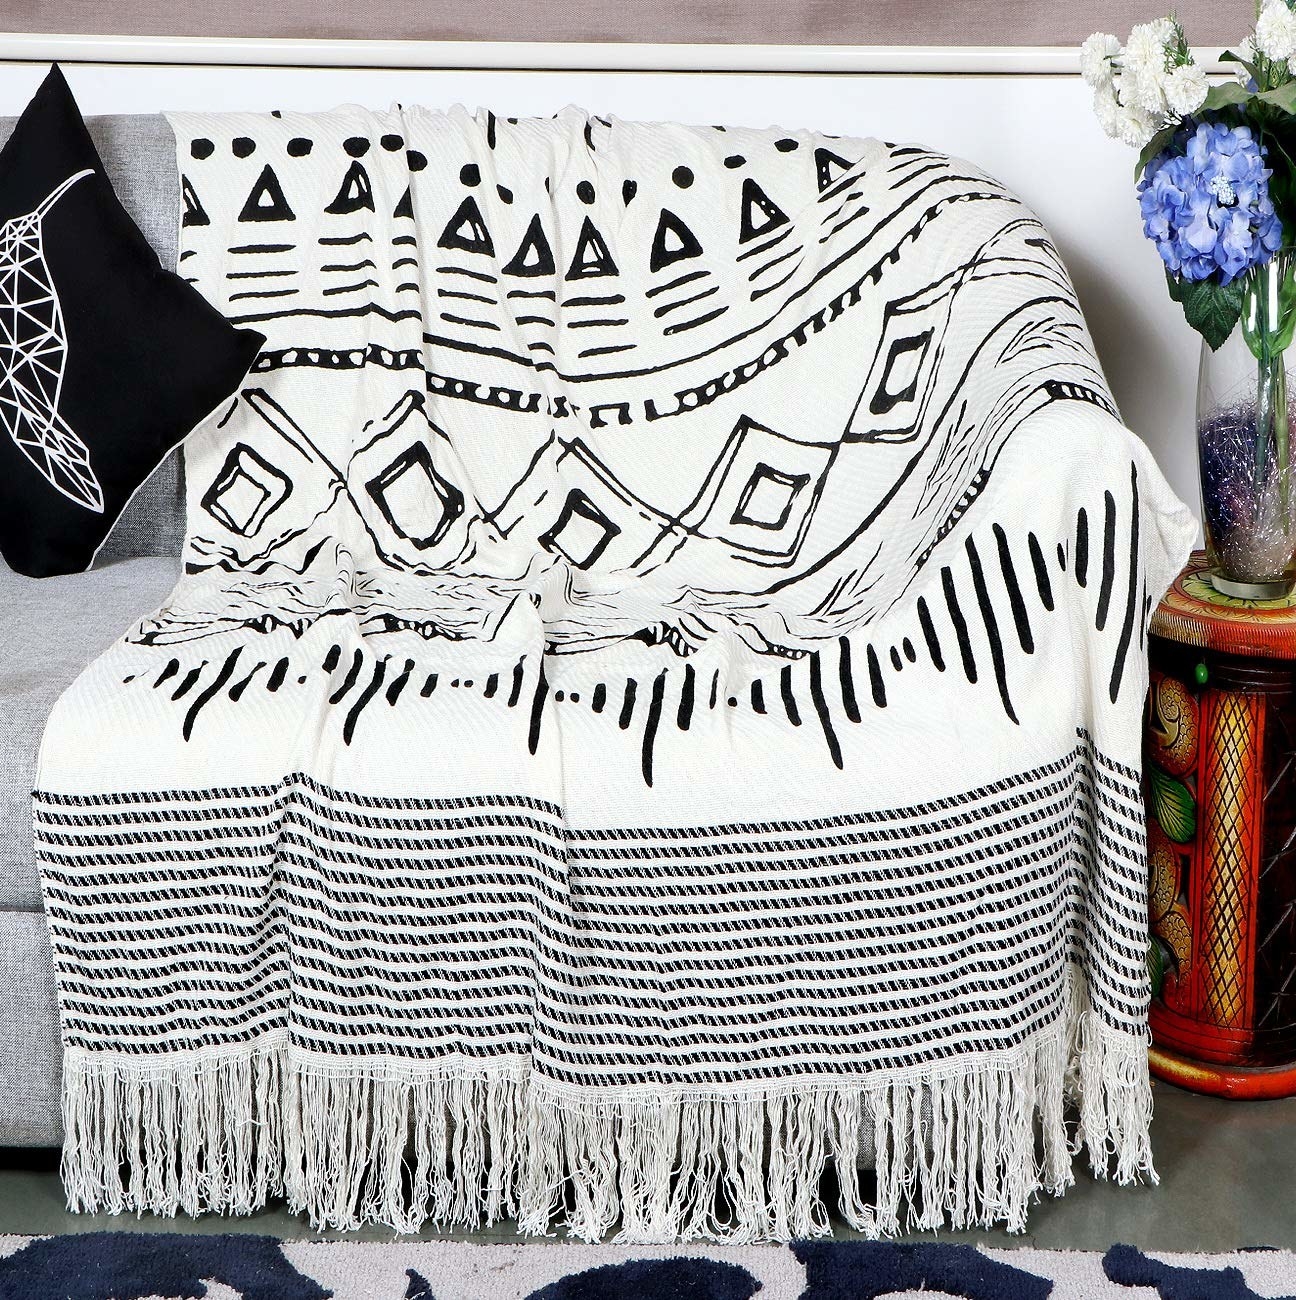 A black and white sofa throw placed on a grey sofa.